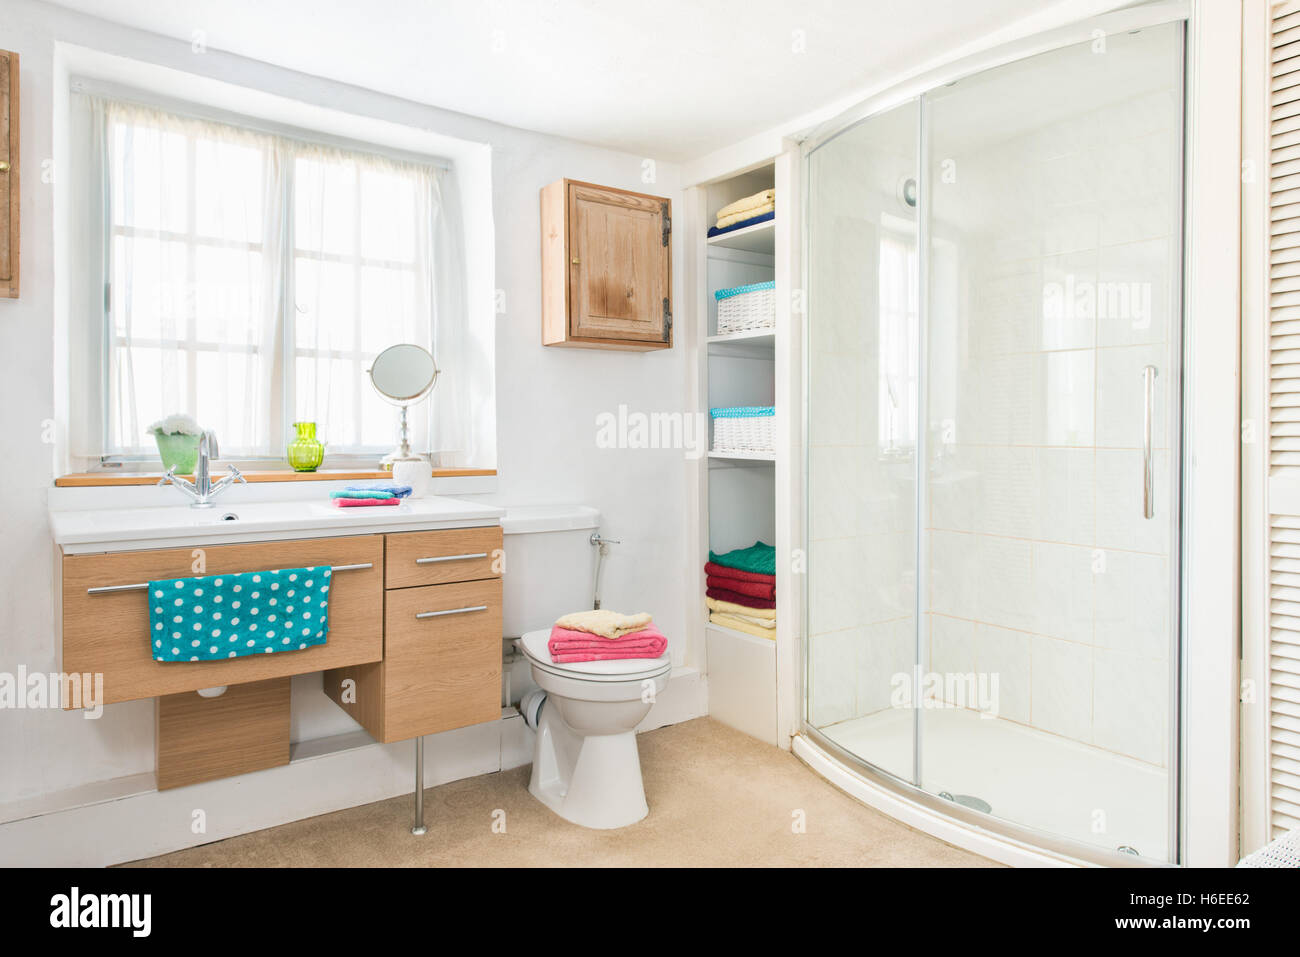 A fresh, clean bathroom with walk in shower in a moderate sized UK home Stock Photo